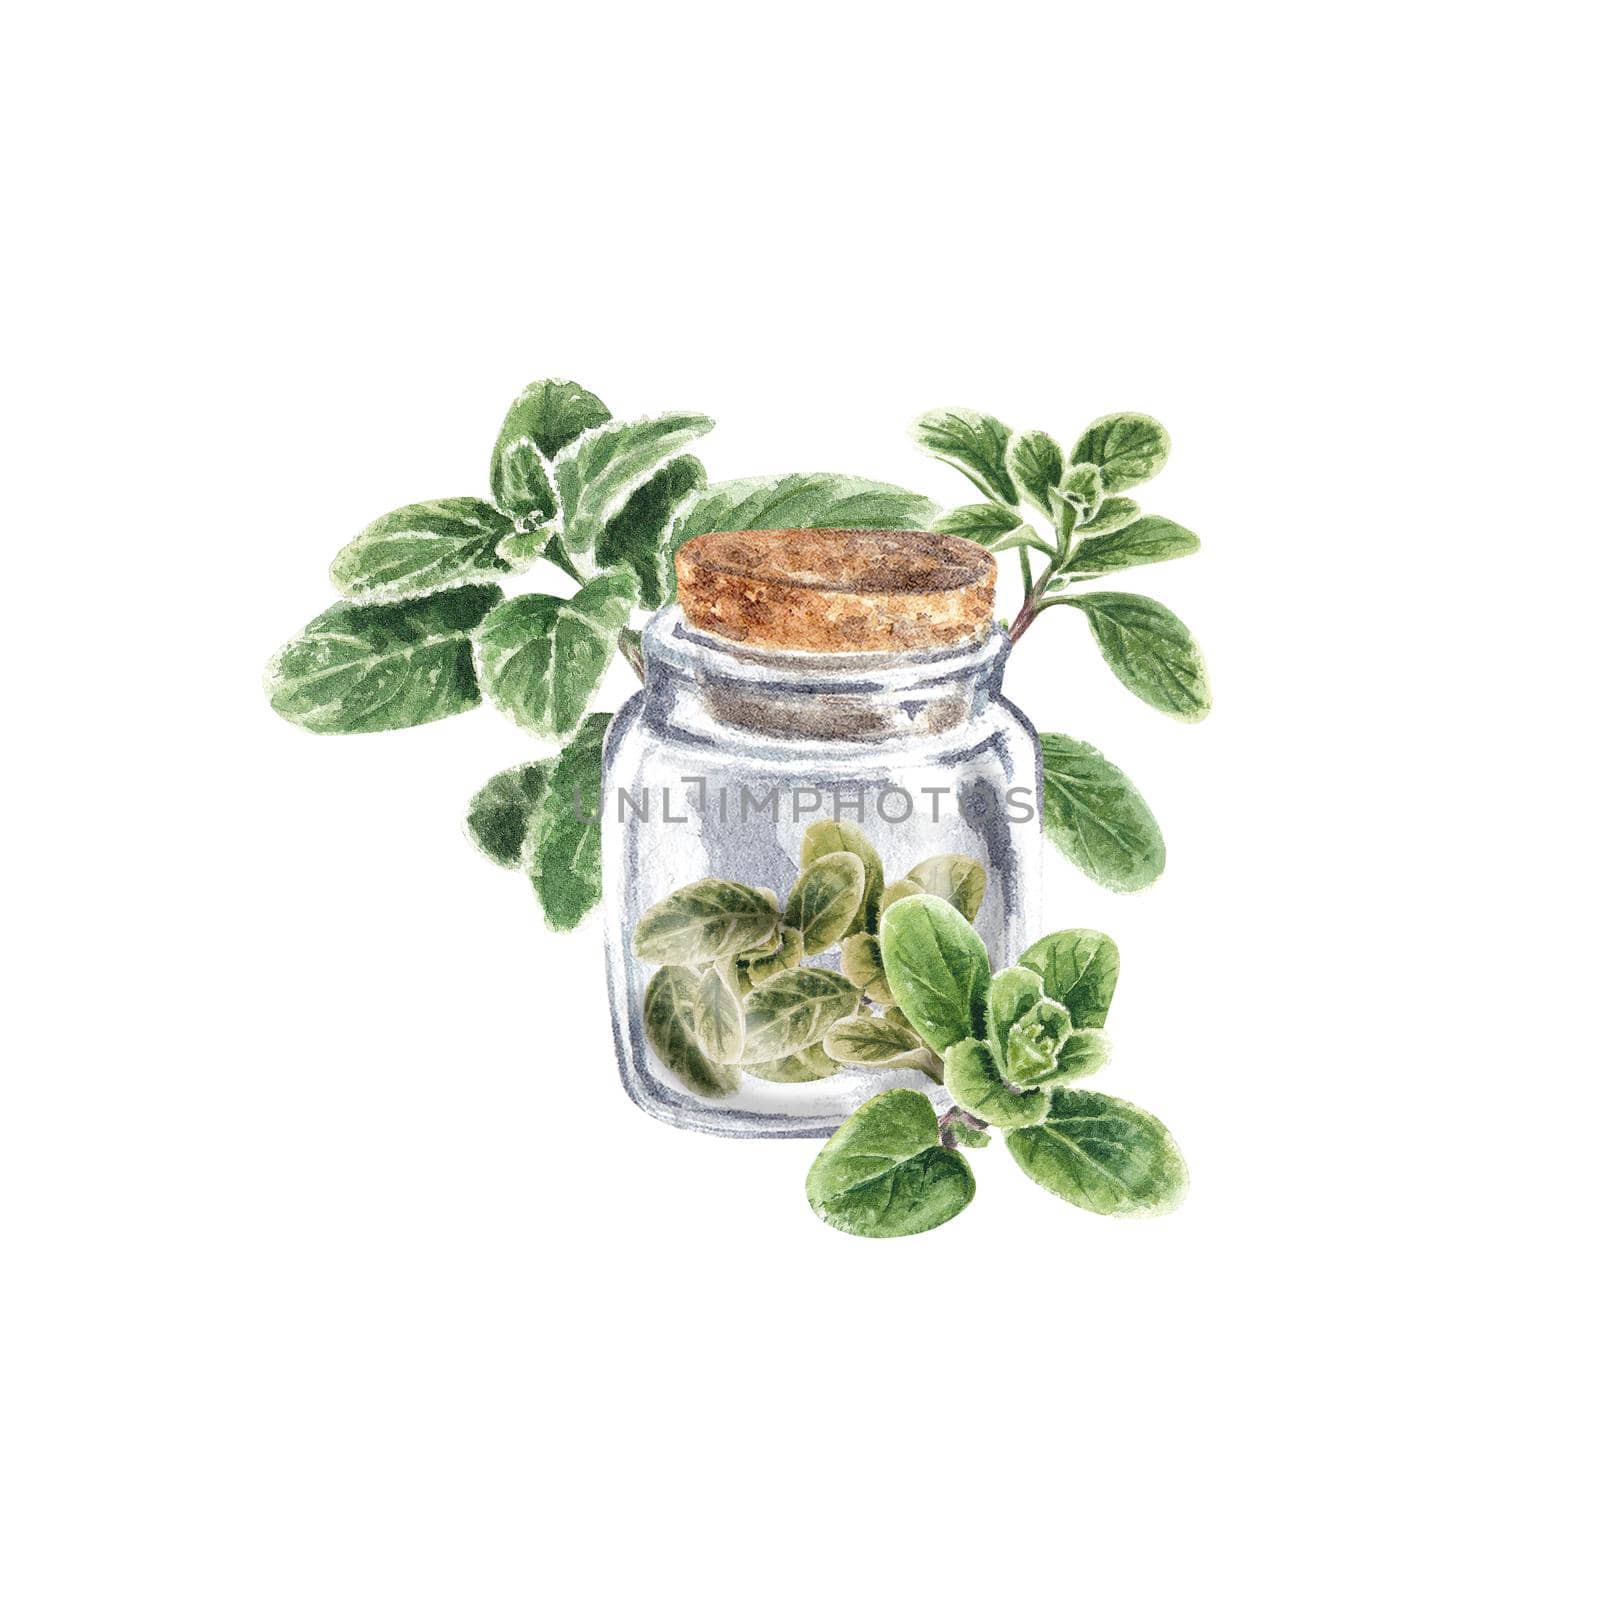 Marjoram green in a jar on a white background. Dried Marjoram , seasoning for dishes. Watercolor illustration of Provencal herbs of the Marjoram are suitable for postcards, menu design